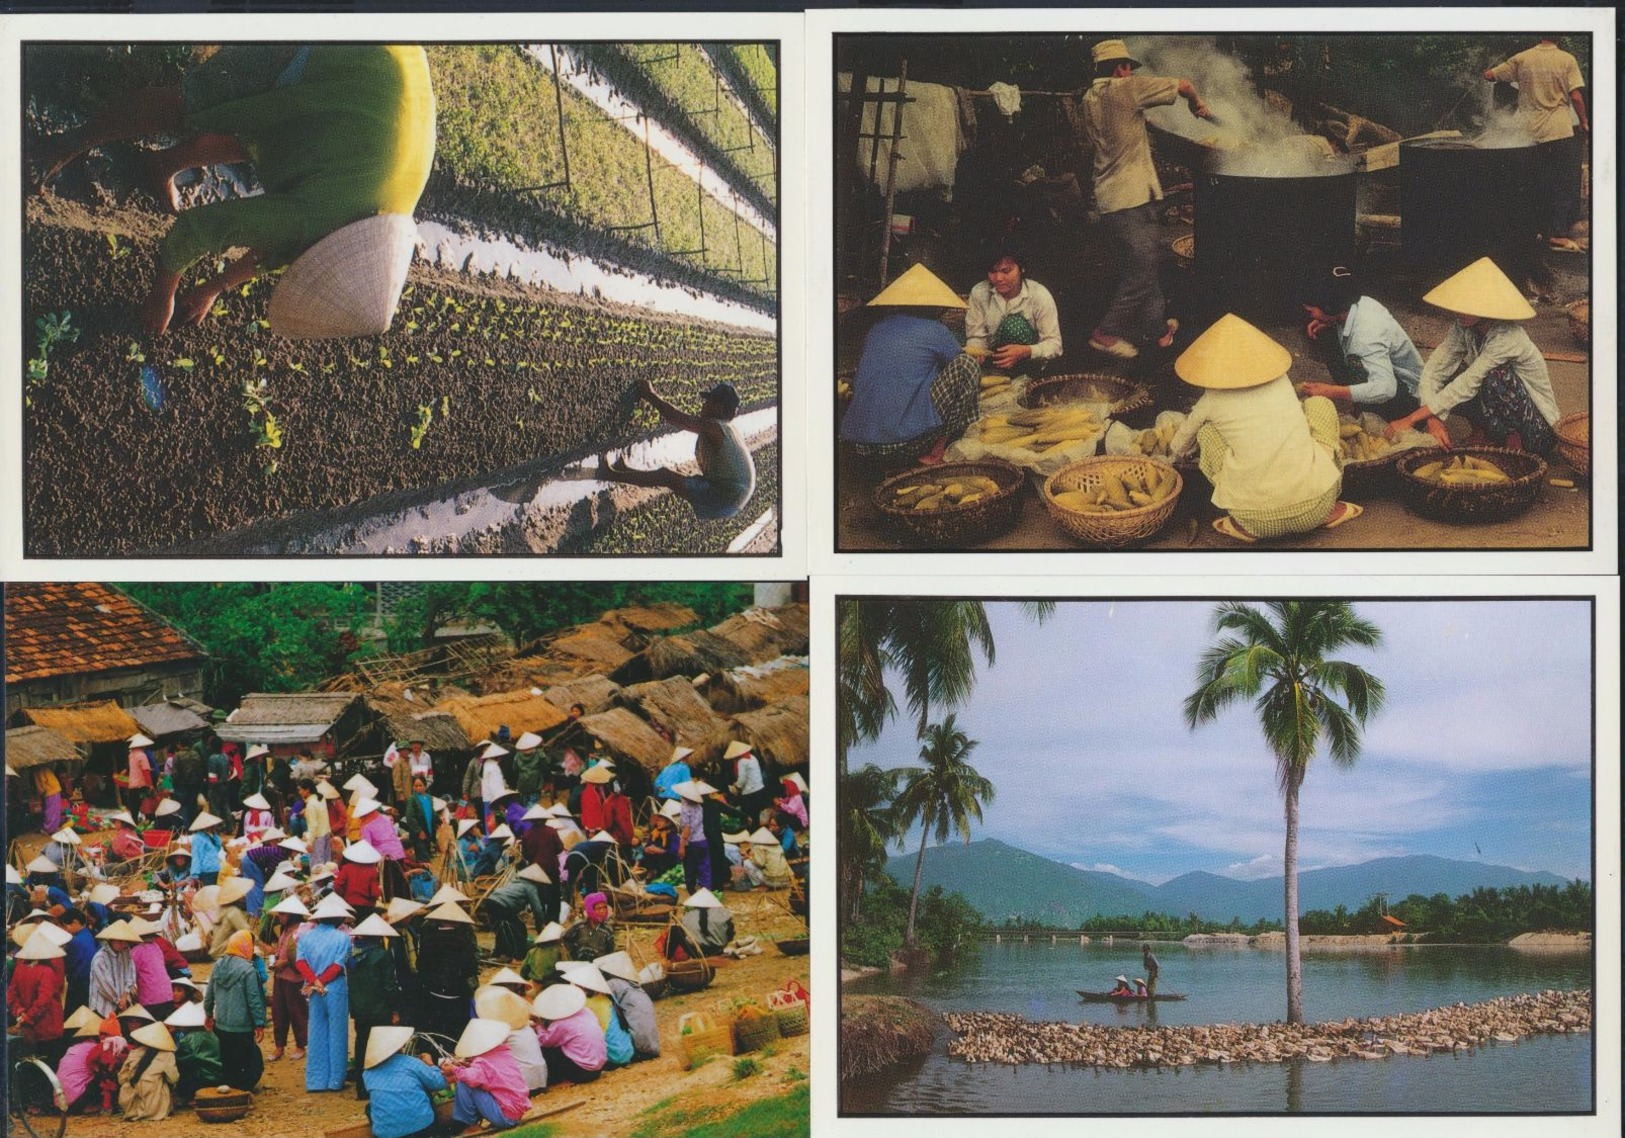 °°° CARNET 4 POSTCARDS - THAILAND - DAILY LIFE IN THE SUBURB OF NHA TRANG CITY °°° - Thaïlande